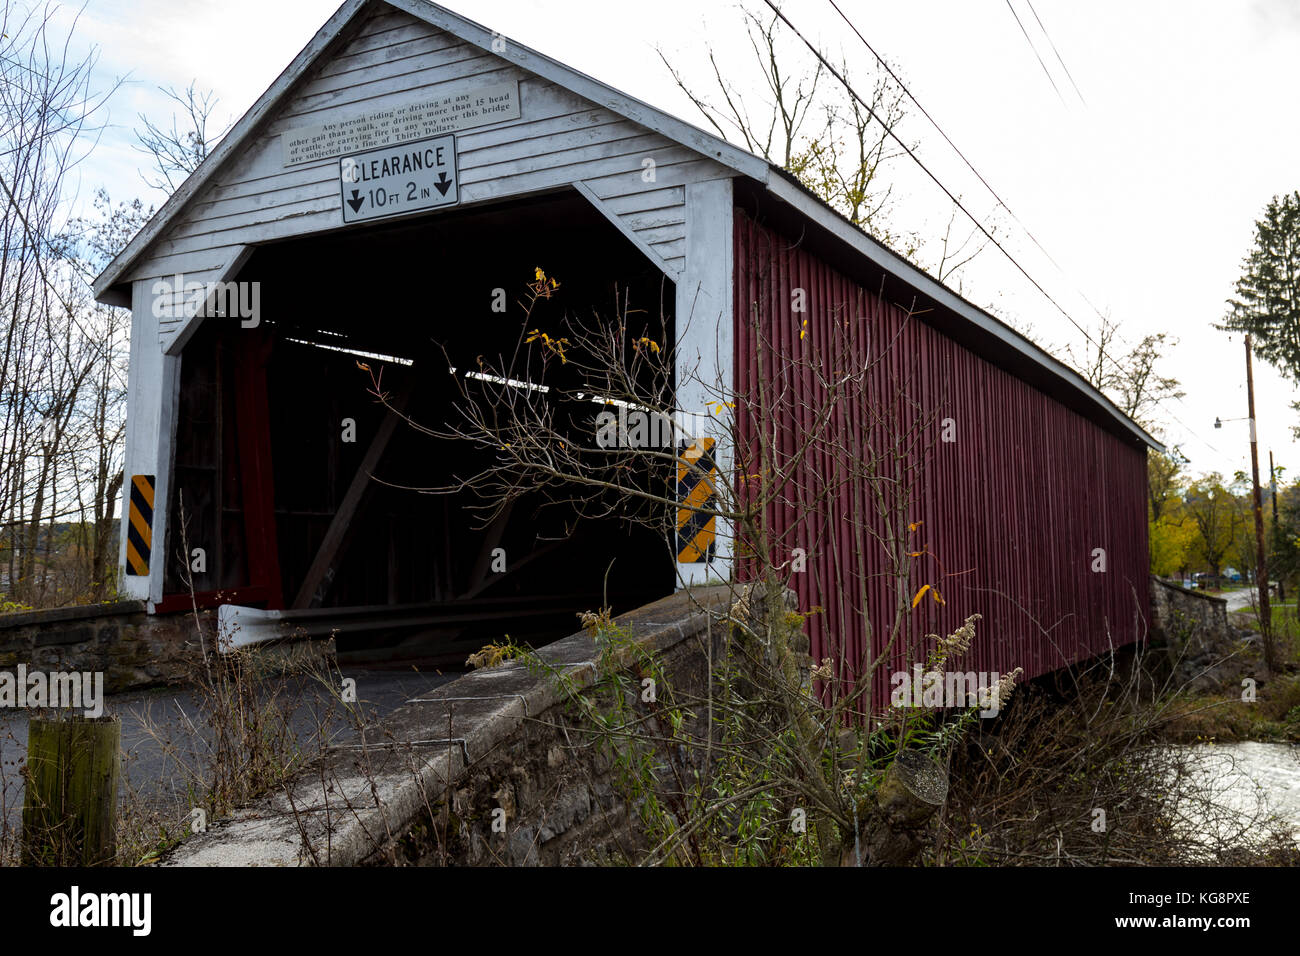 Mifflinburg, PA - November 4, 2017: The Hassenplug Bridge spans Buffalo Creek, and at 80 feet long, in one of the oldest wooden covered bridges in the Stock Photo